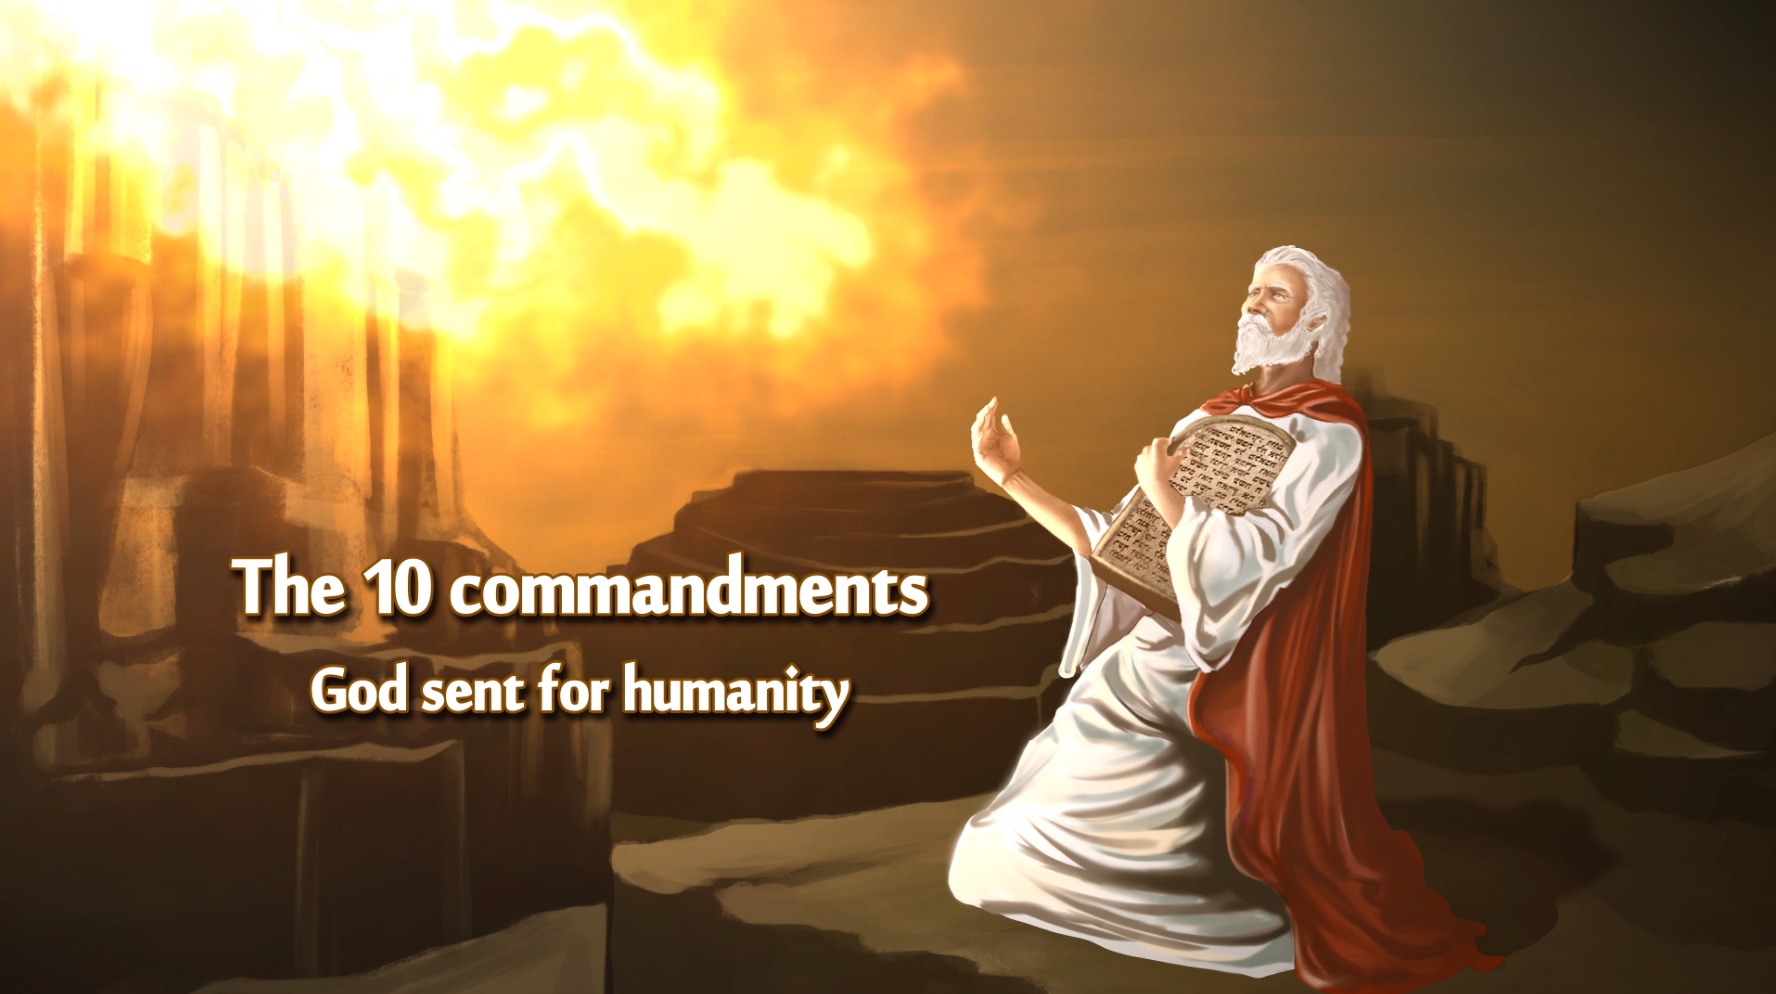 10 commandments from Bible